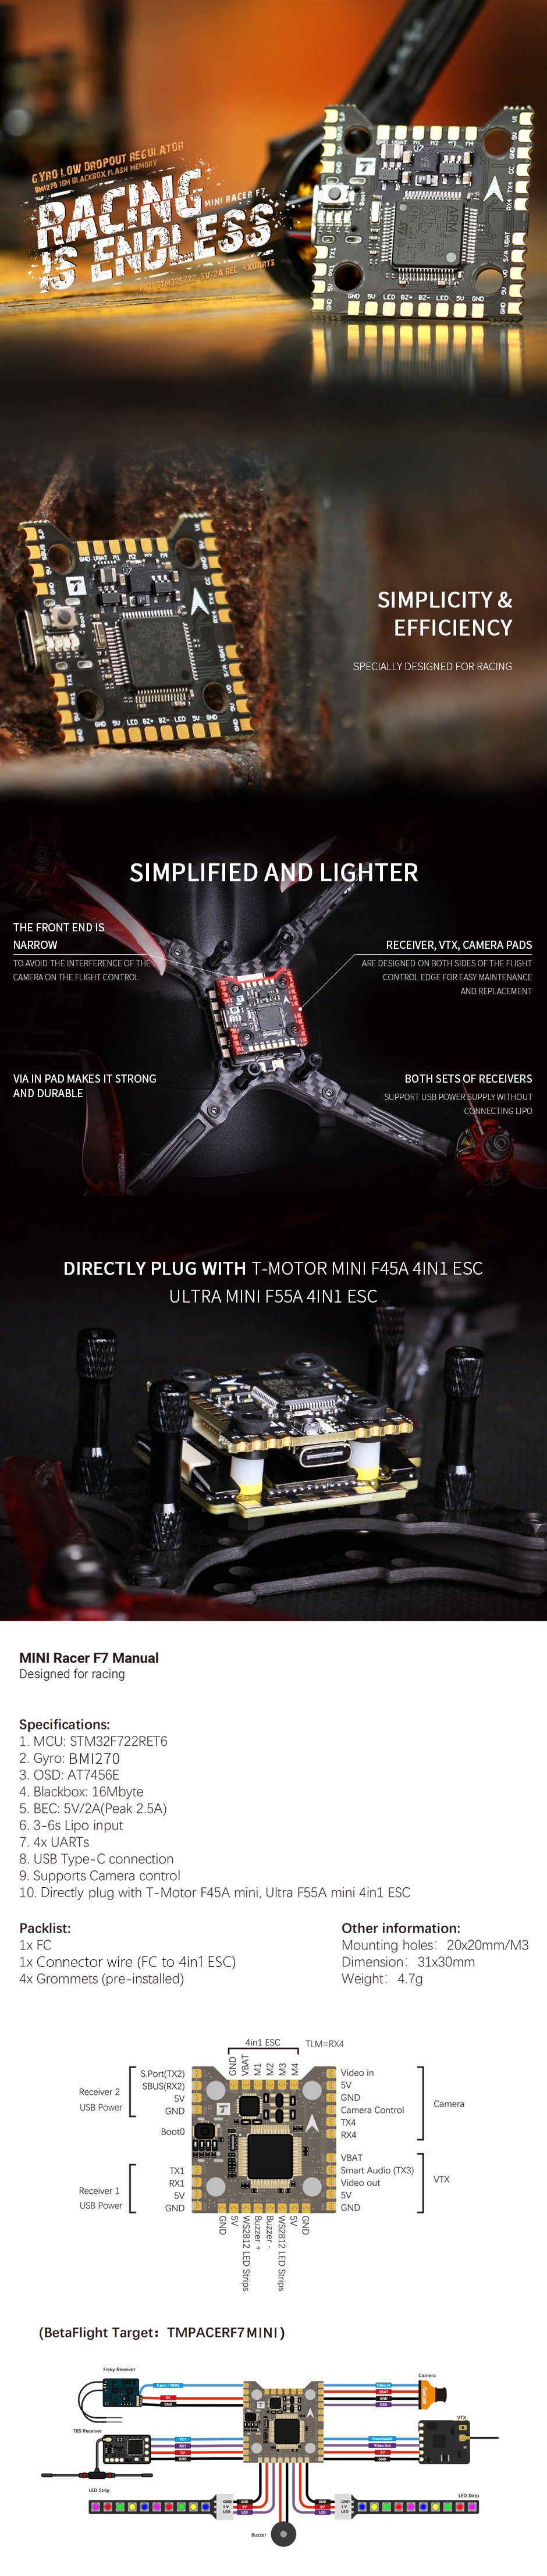 A description and specification of the T-Motor Mini racer F7 flight controller